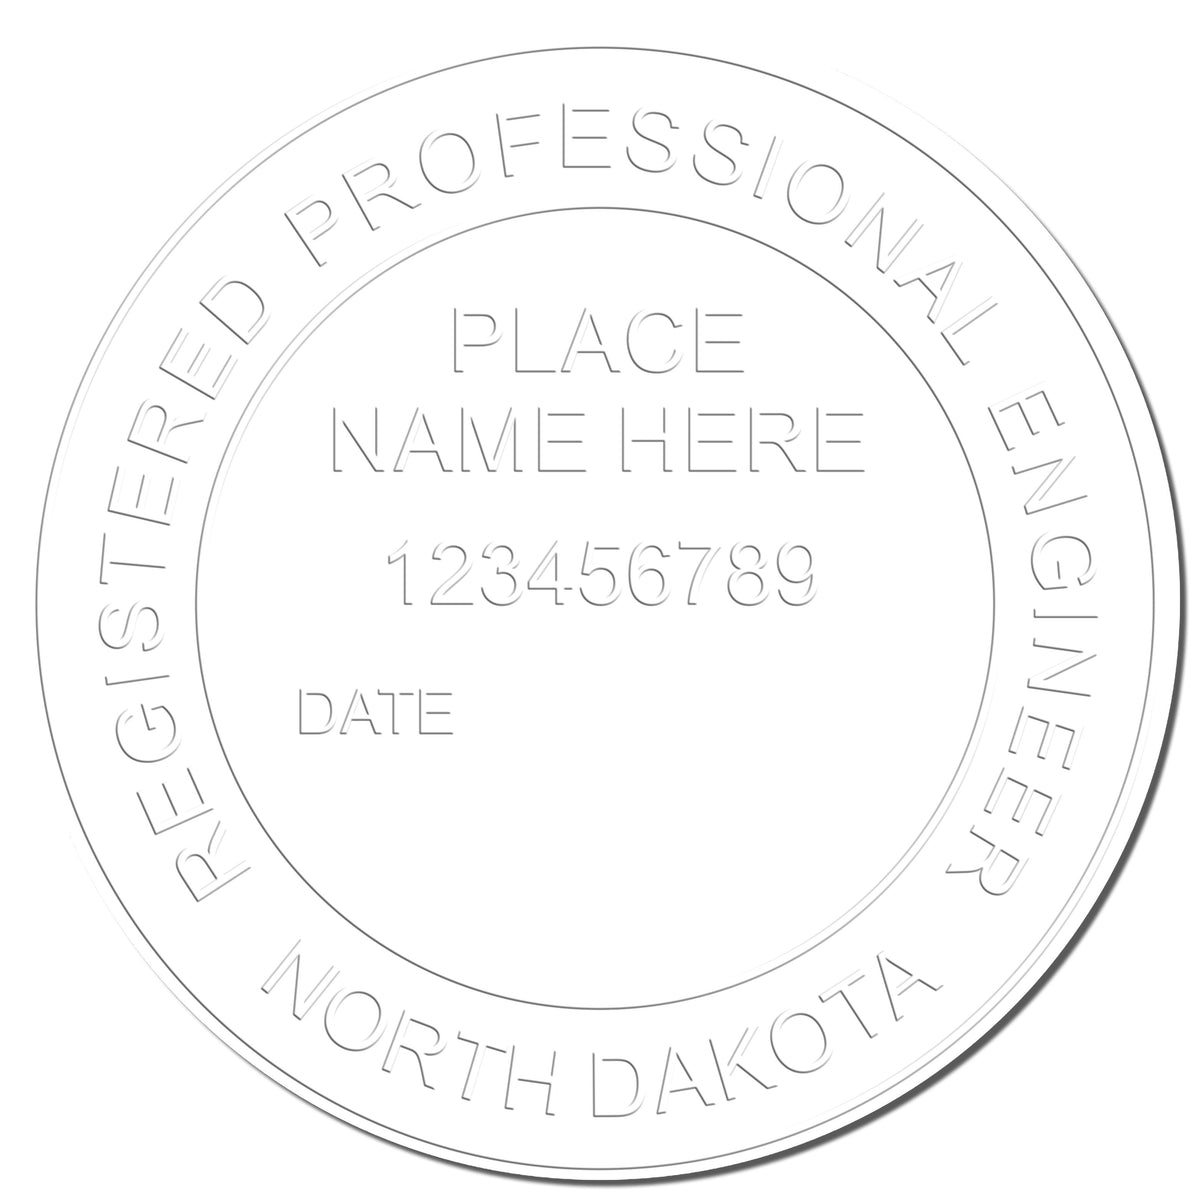 This paper is stamped with a sample imprint of the Gift North Dakota Engineer Seal, signifying its quality and reliability.